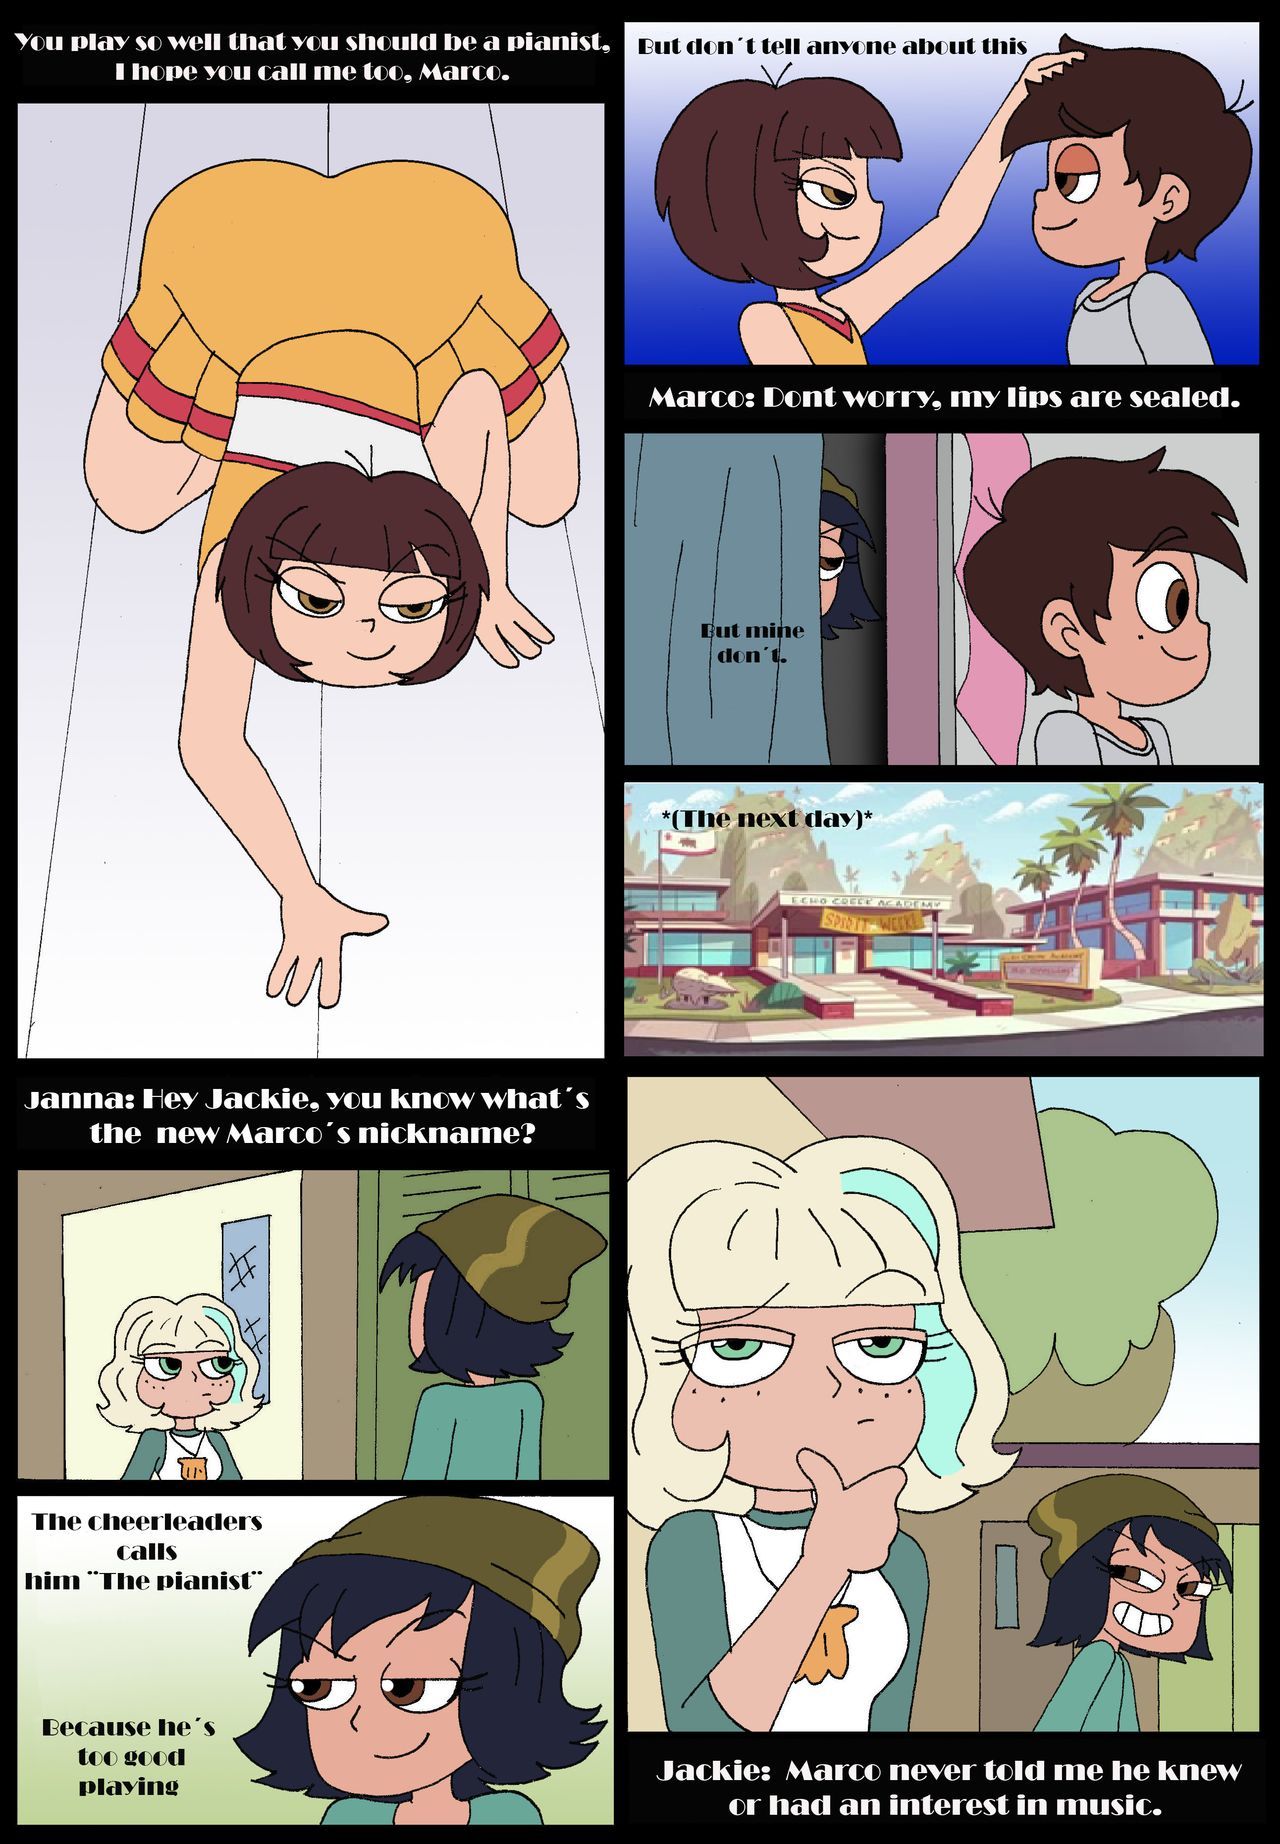 Playing with Fire (Star vs. the Forces of Evil) by Ferozyraptor page 38